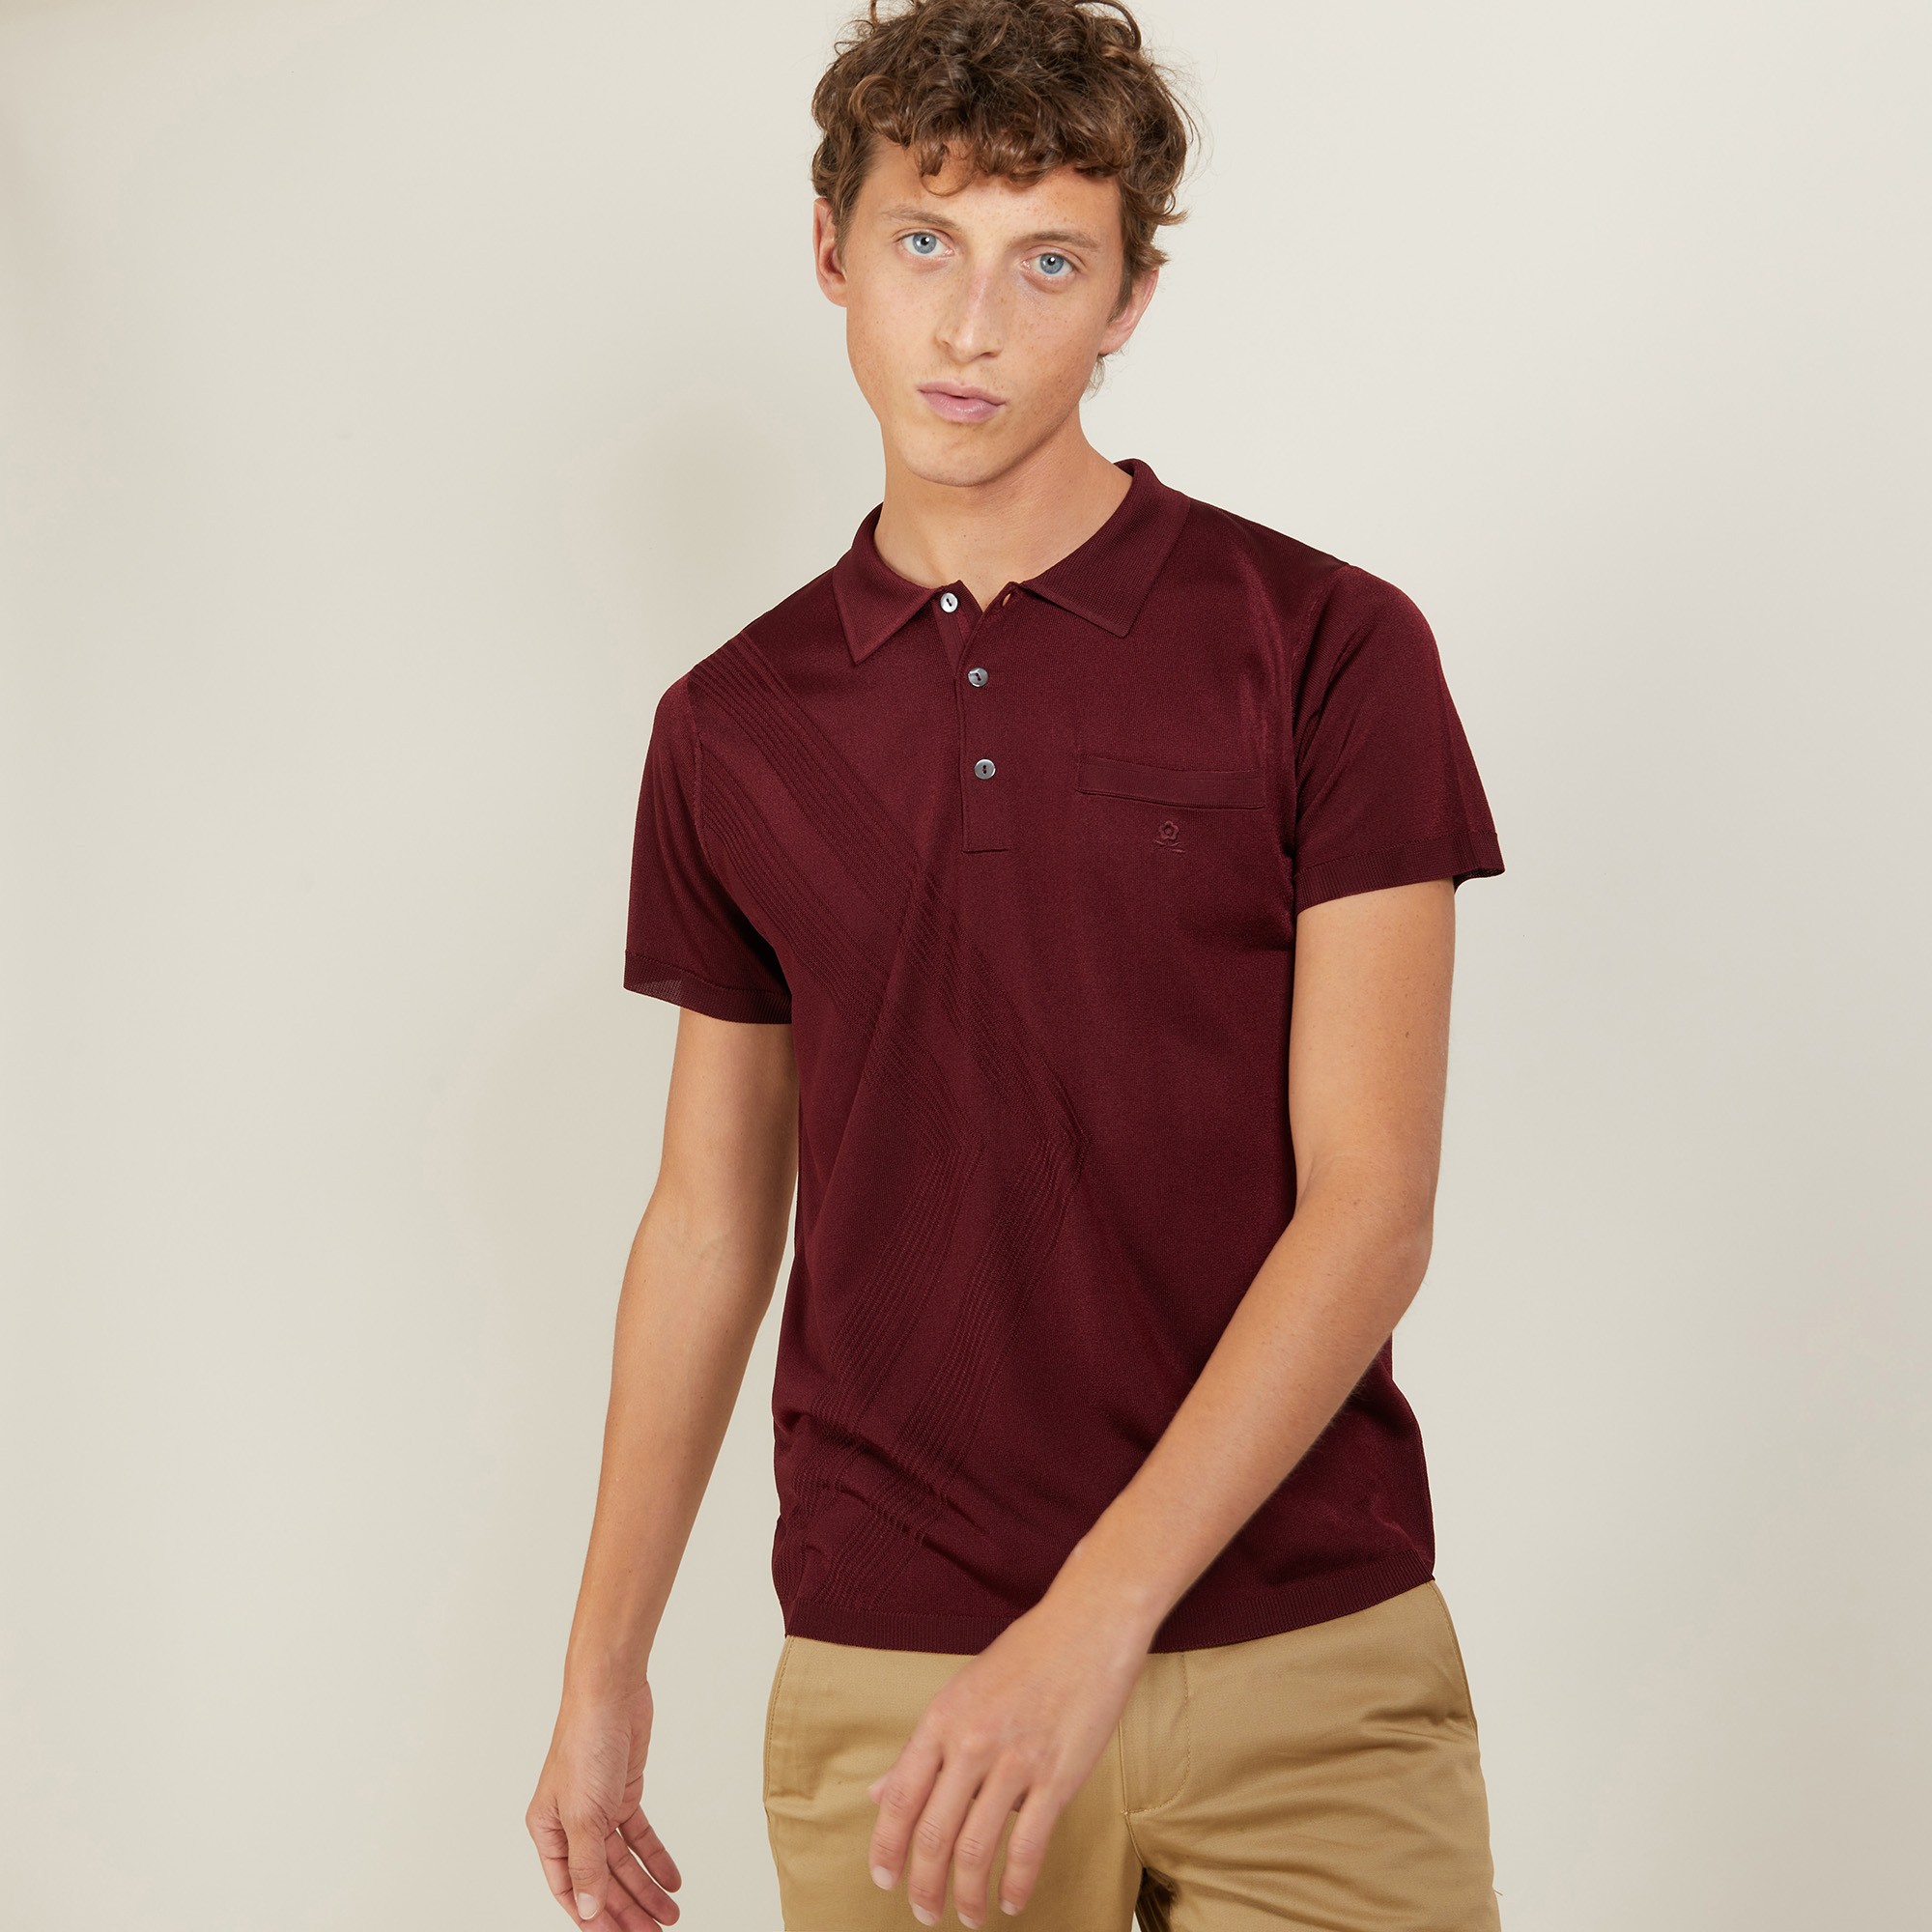 Fil Lumière polo shirt with elbow patches